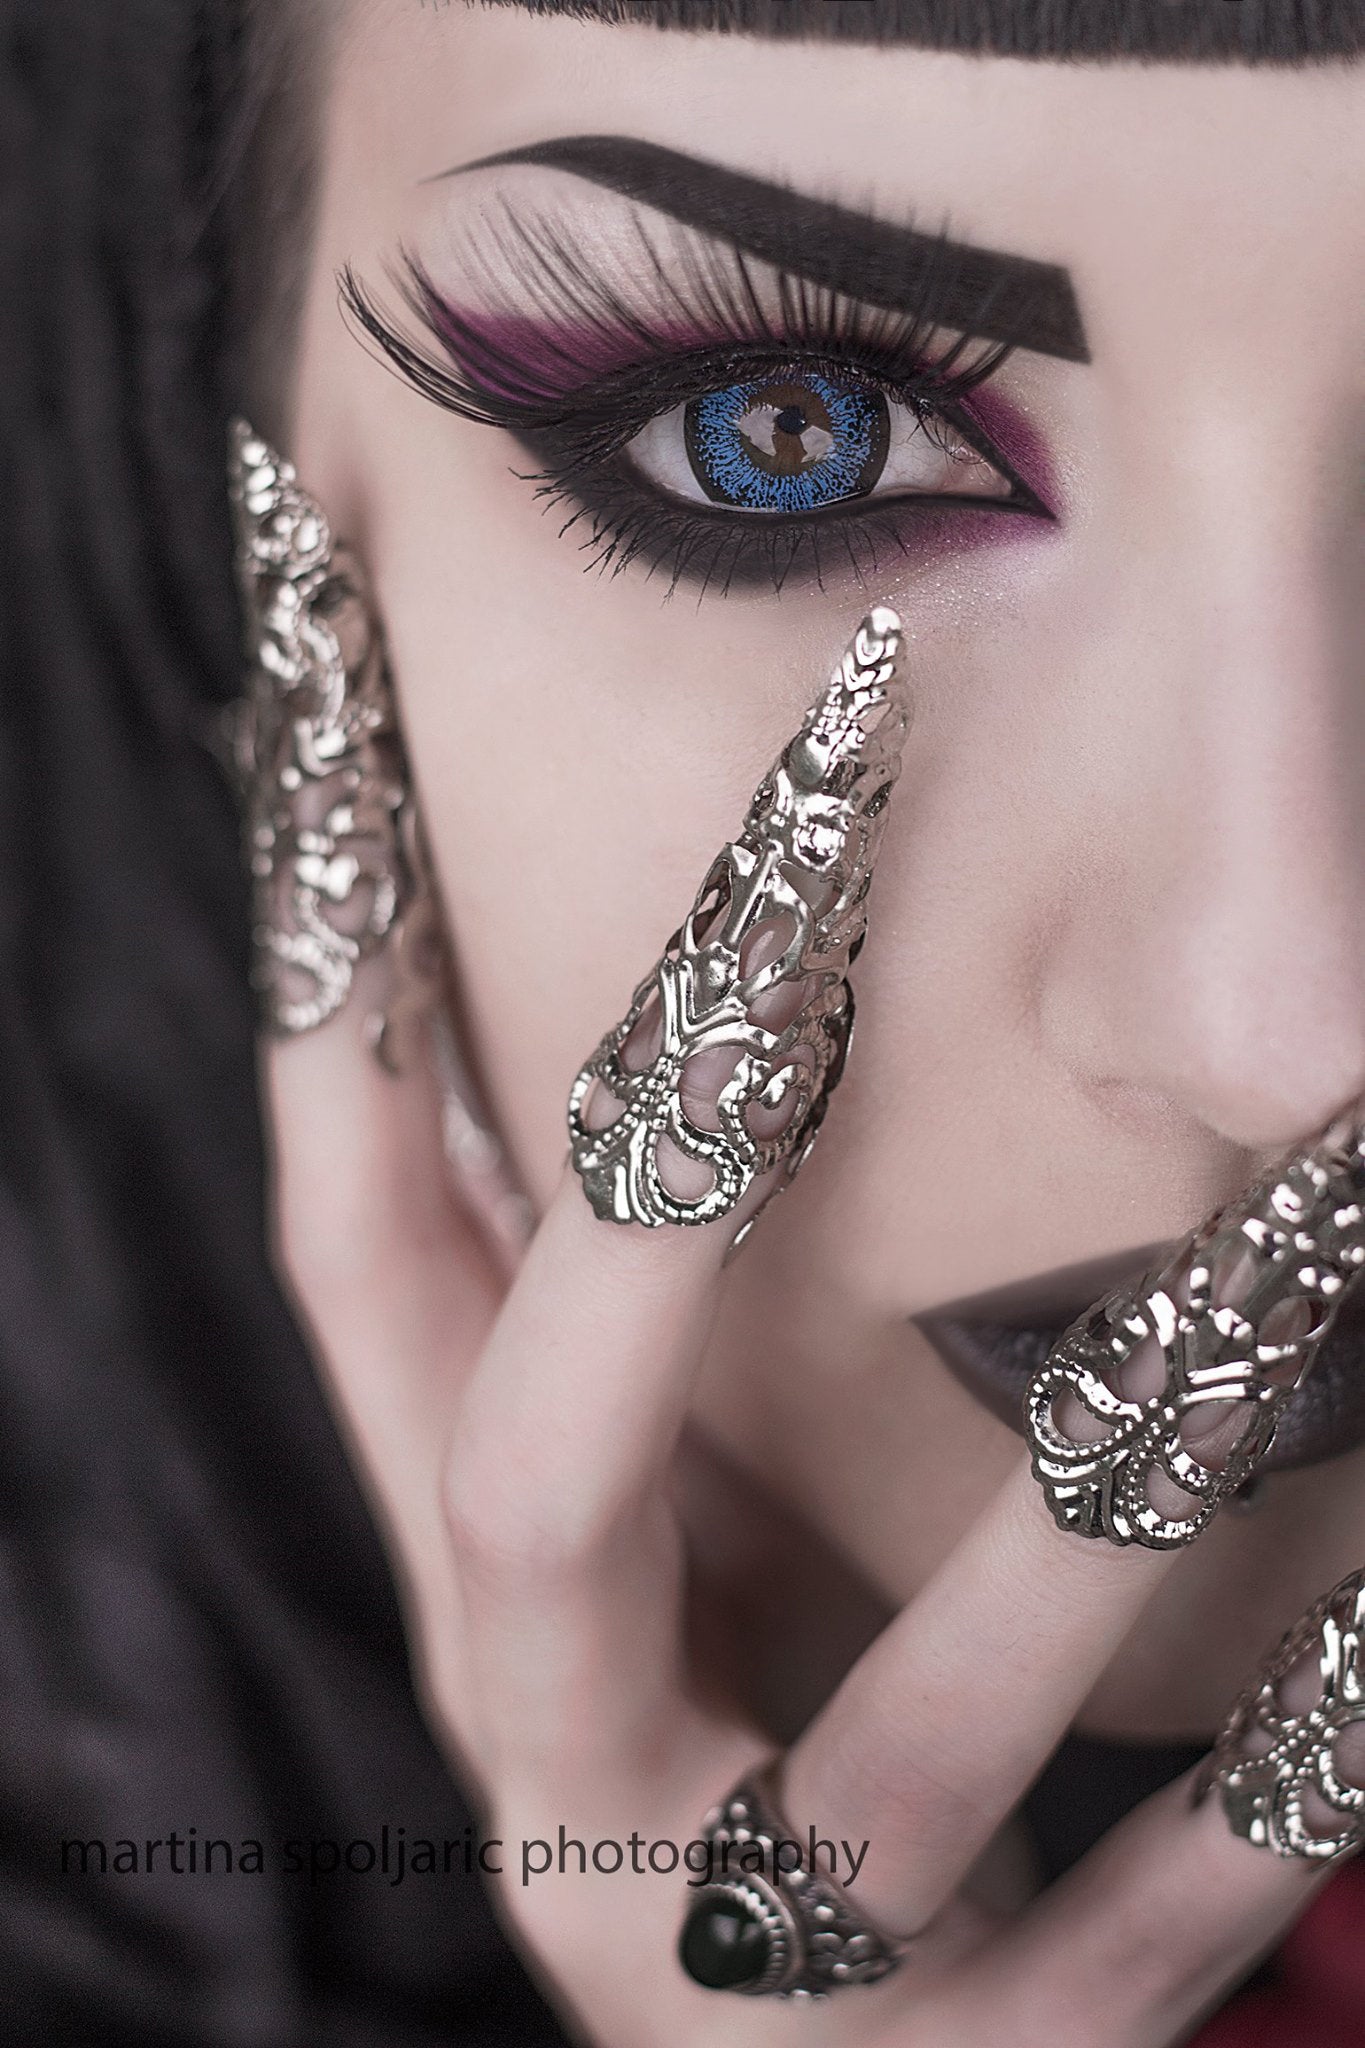 A dramatic portrait featuring Myril Jewels' signature long finger claws, these neo-gothic pieces are a bold expression of dark avant-garde style. Perfect for gothic-chic aficionados, they add a witchcore touch to Halloween ensembles or any minimal goth daily wear, embodying an edgy, festival-ready look